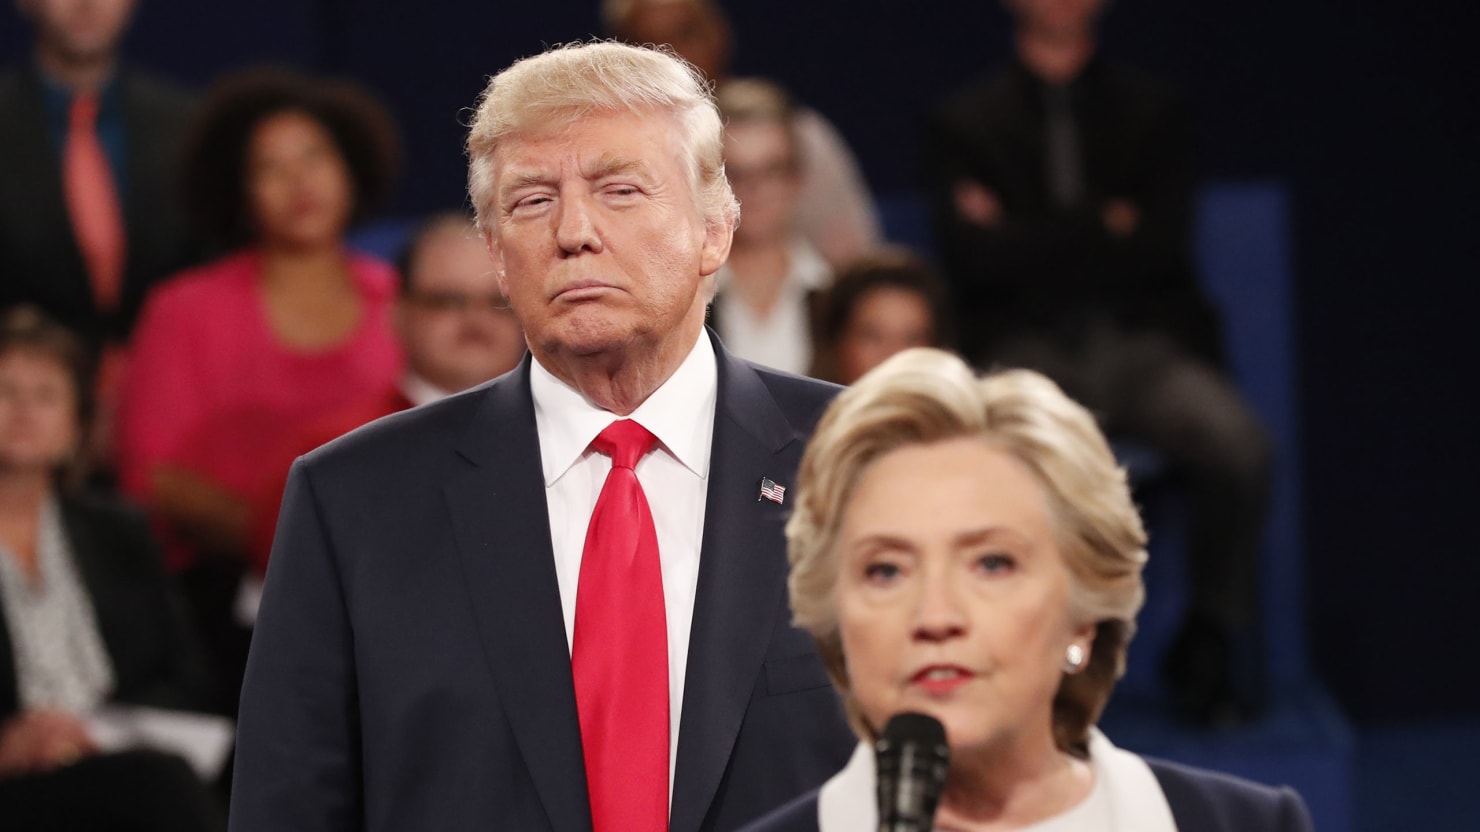 Donald Trump: Hillary Clinton Will ‘Be in Jail’ if I’m Elected1480 x 832